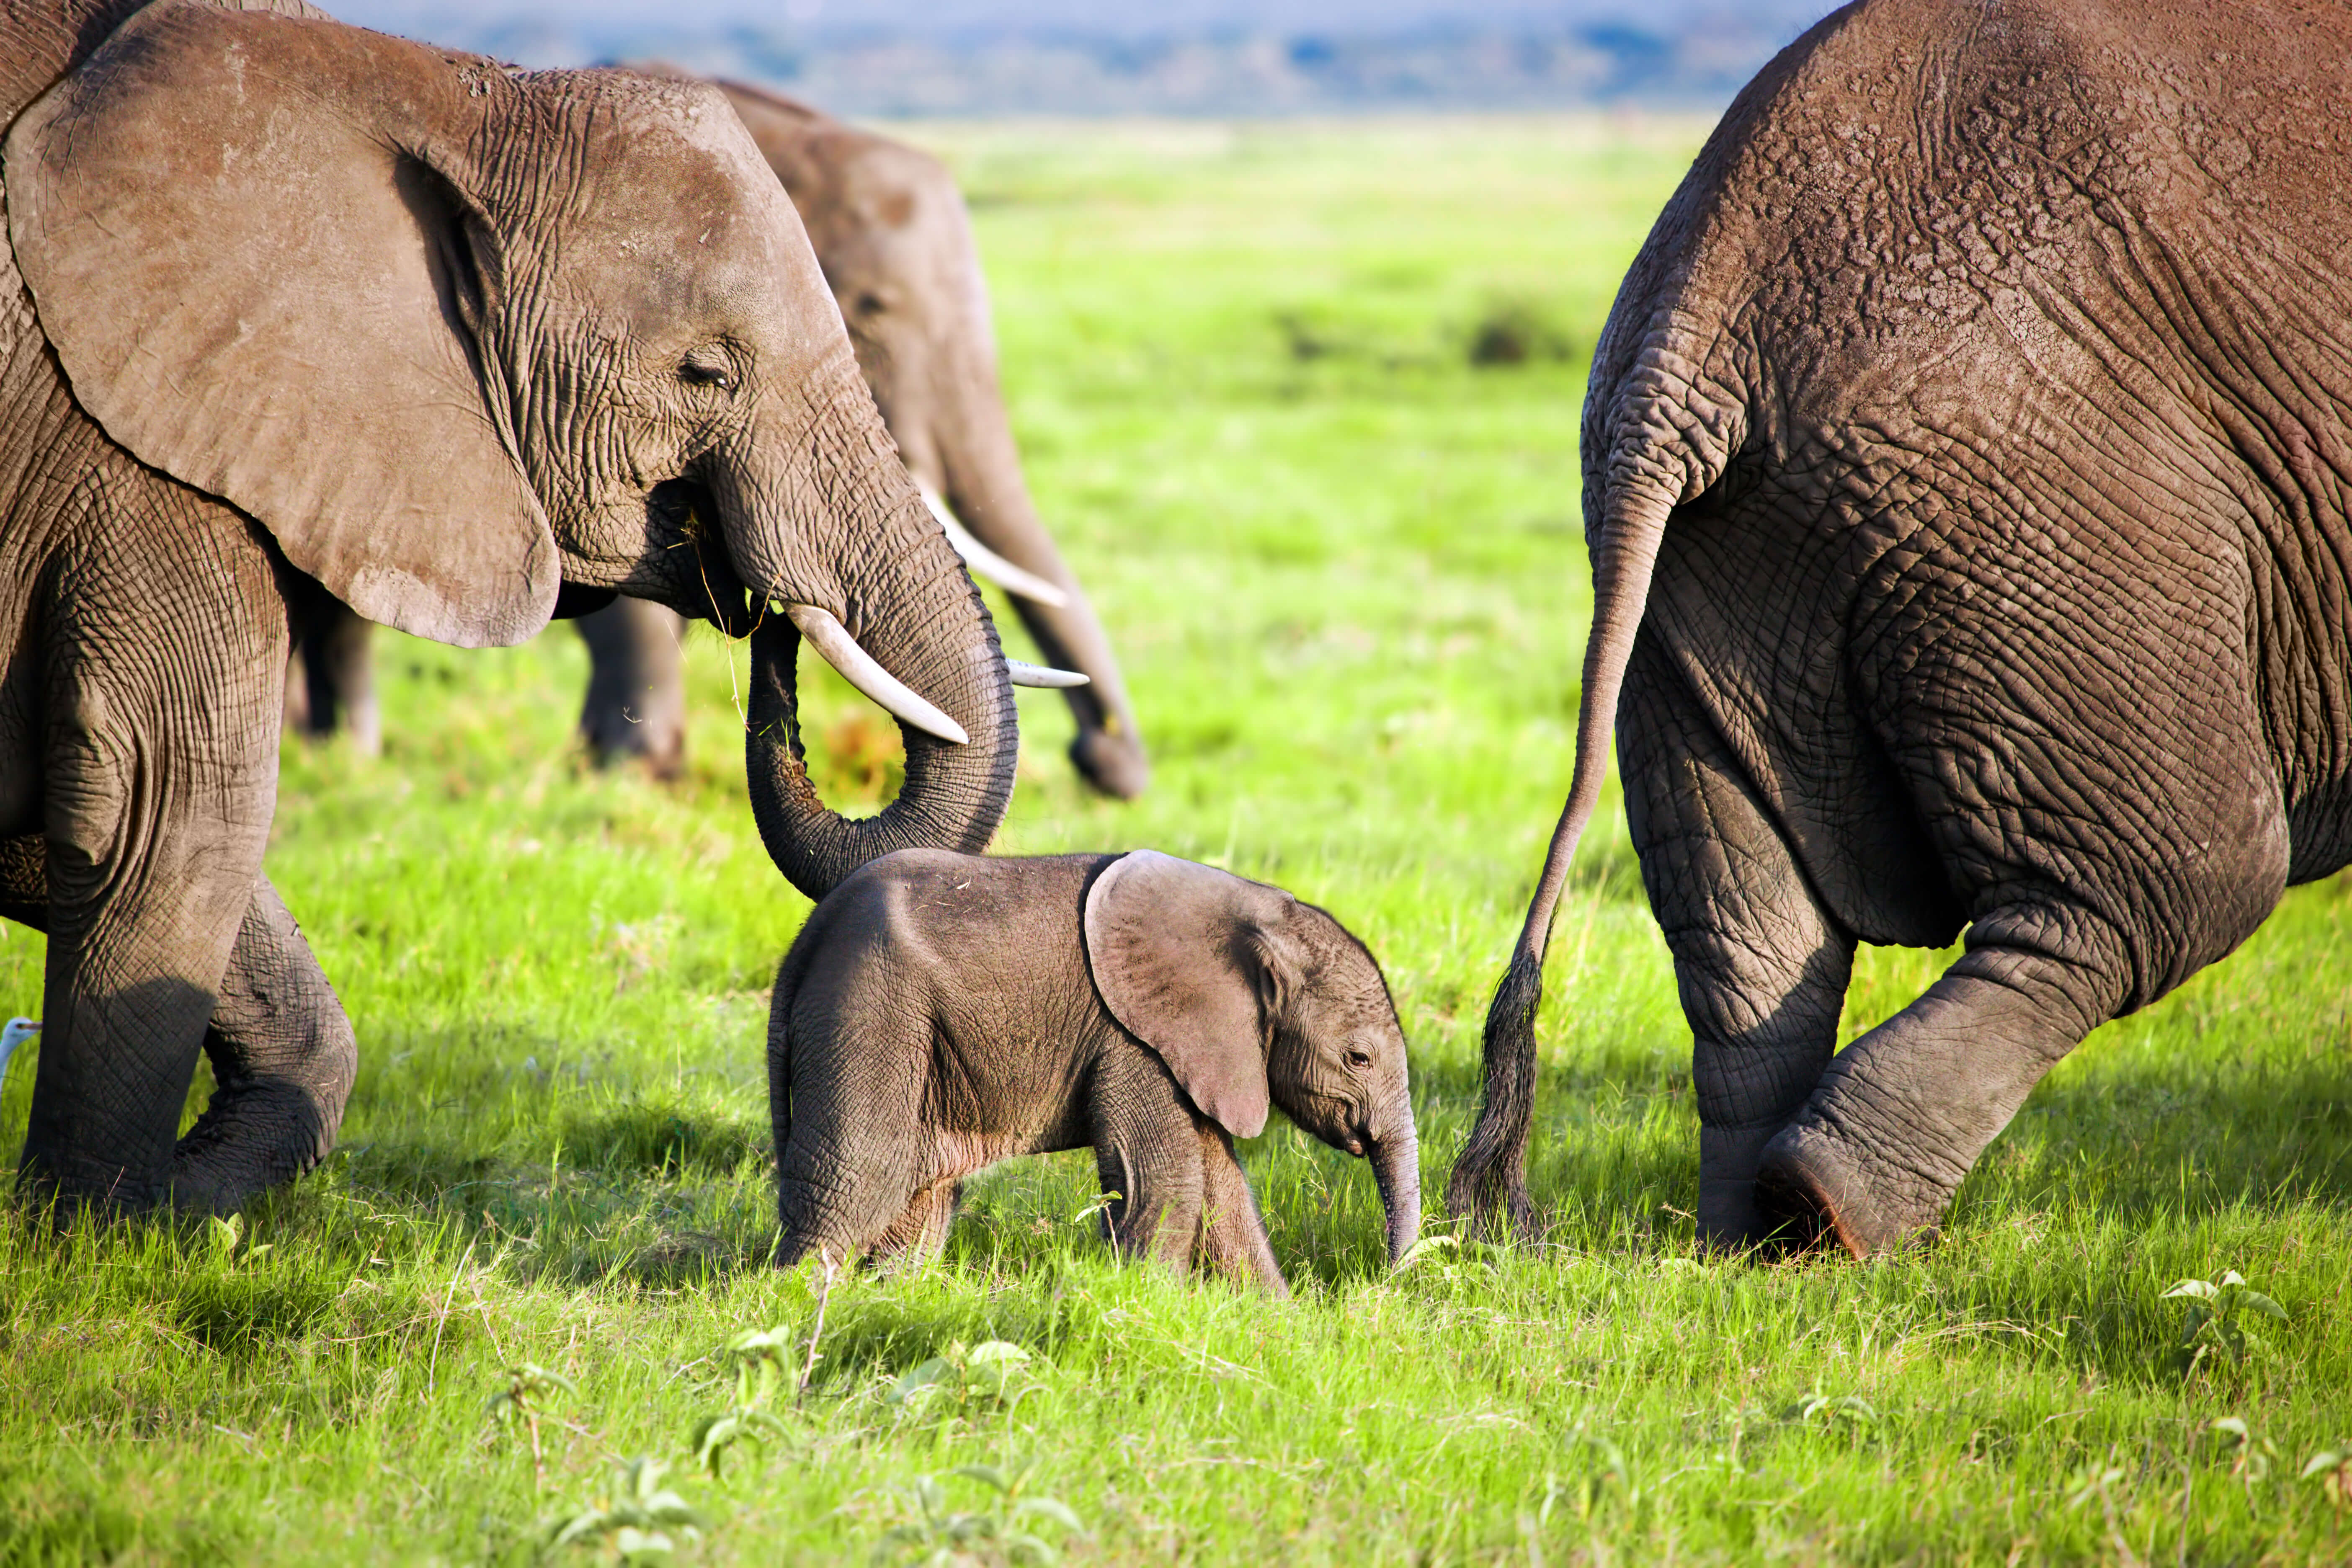 Baby elephants need their vaccinations, too - TMC News